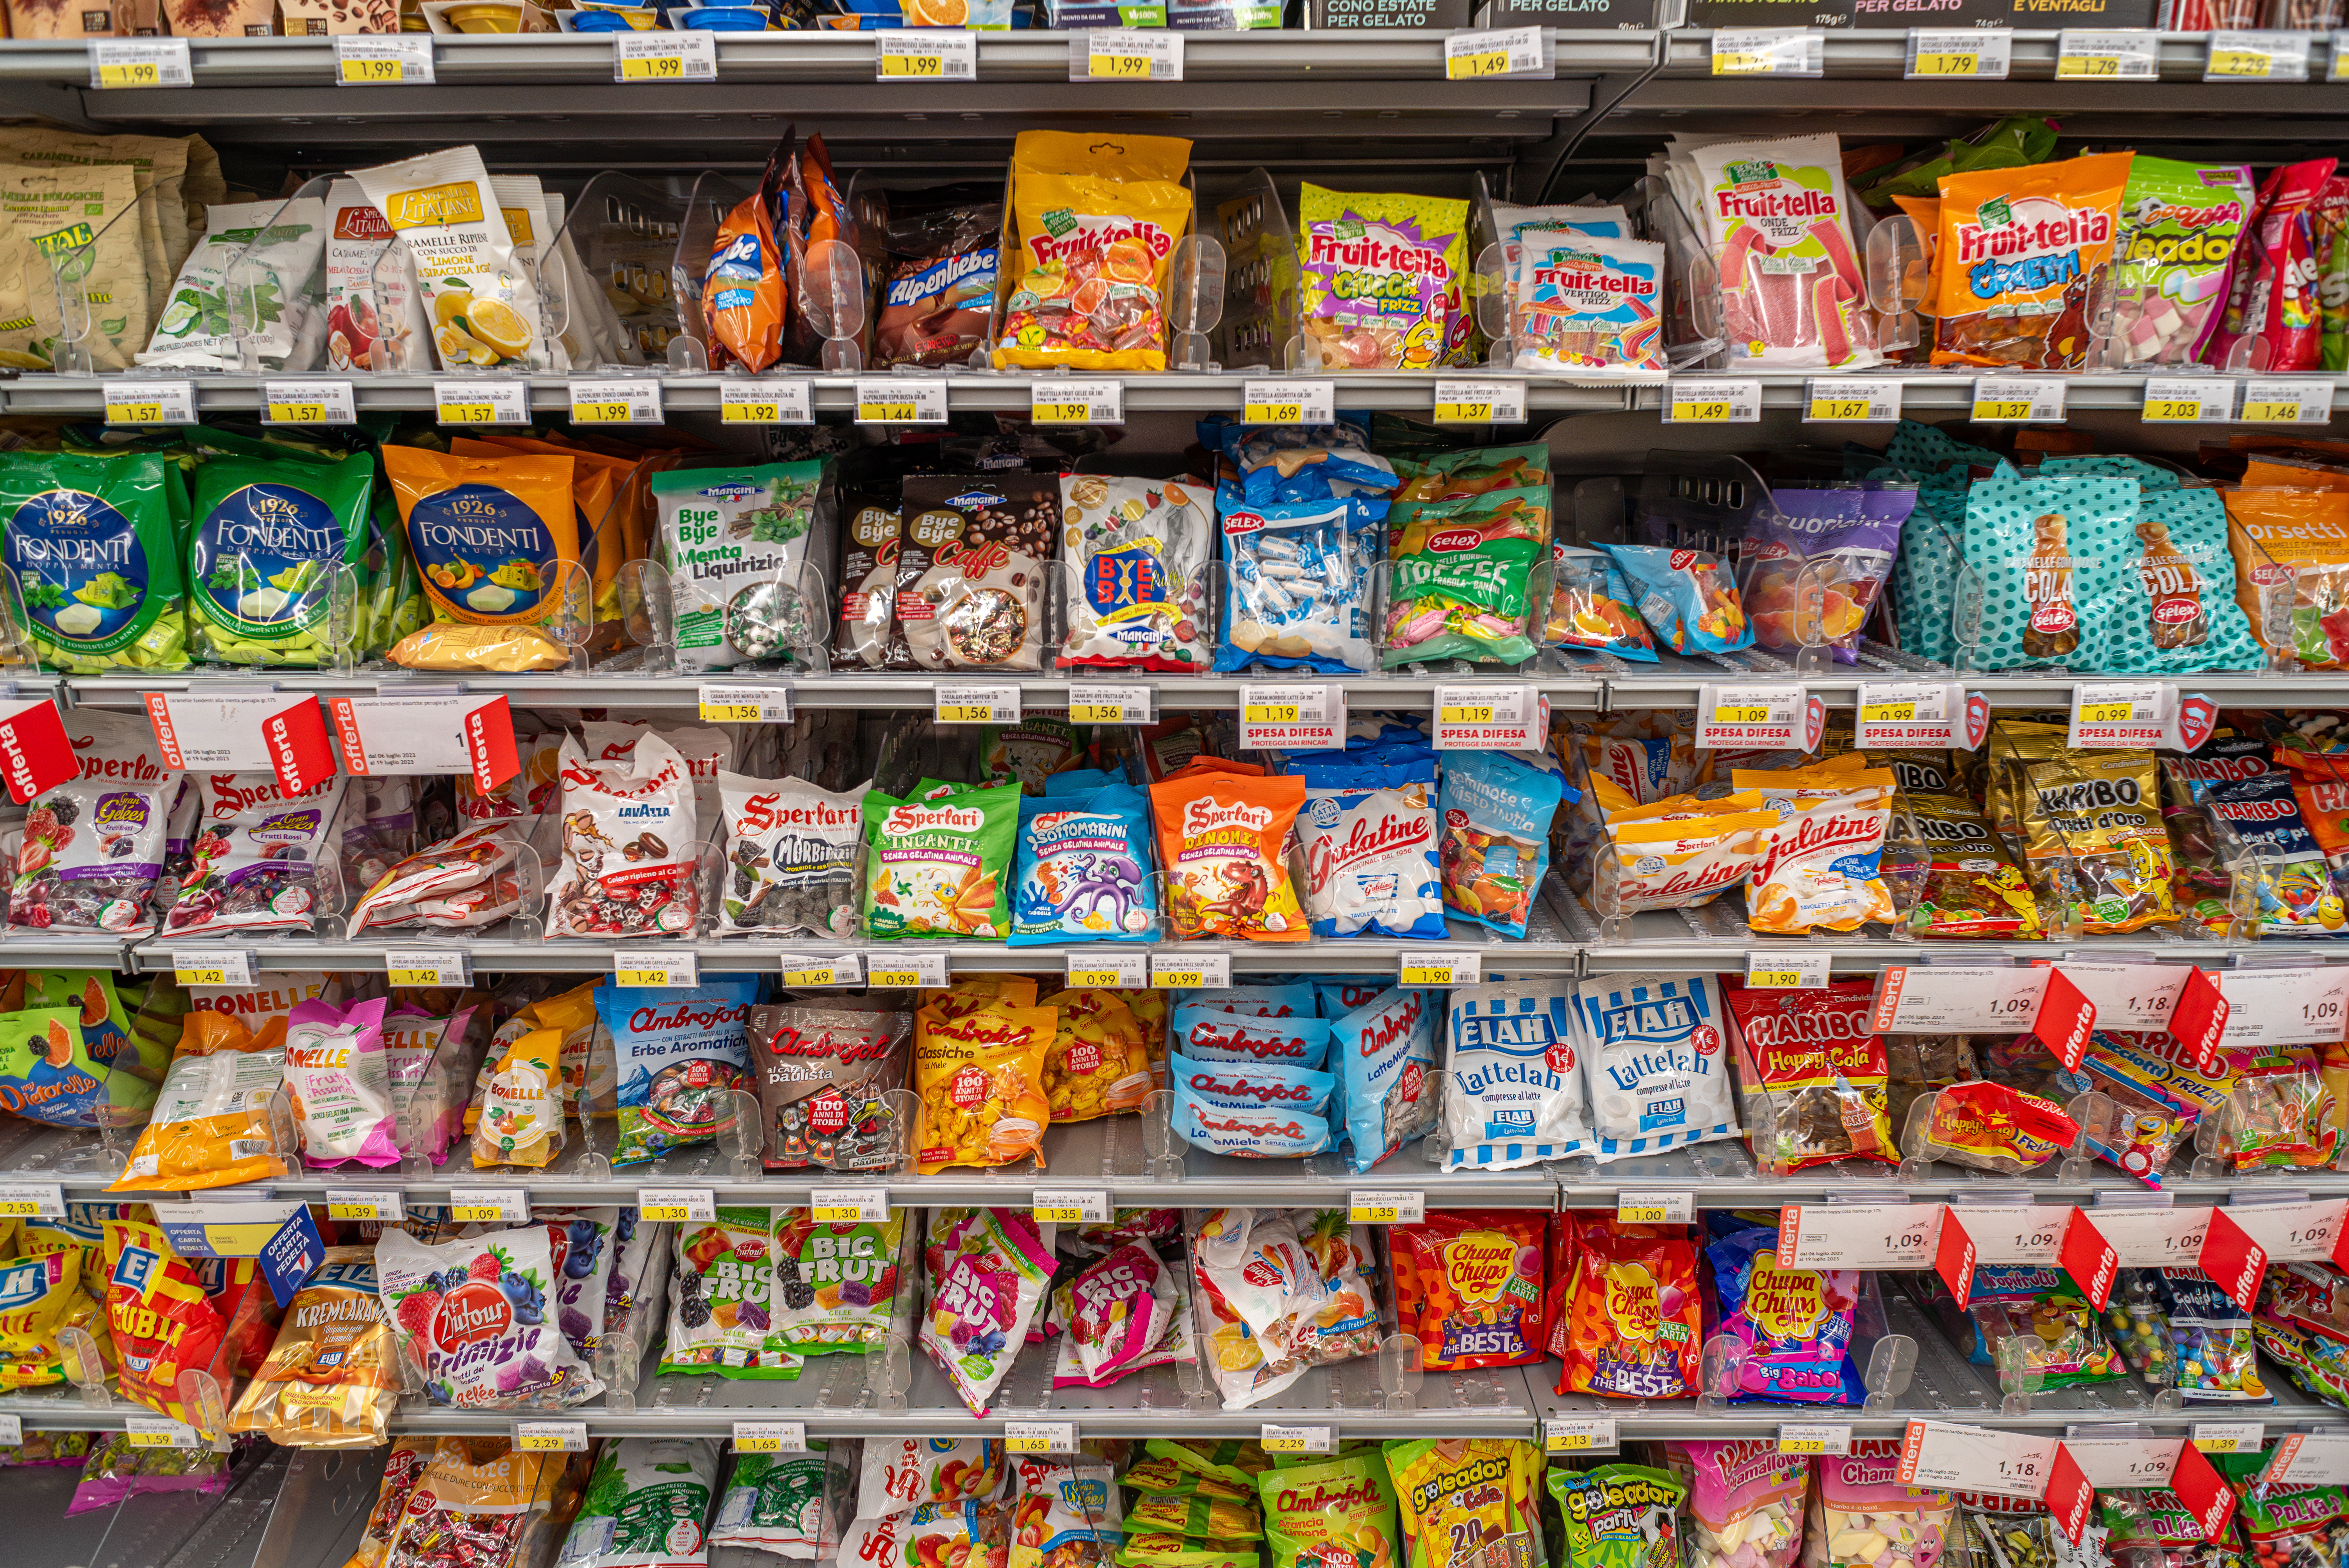 Concerns over ultra-processed food guidance